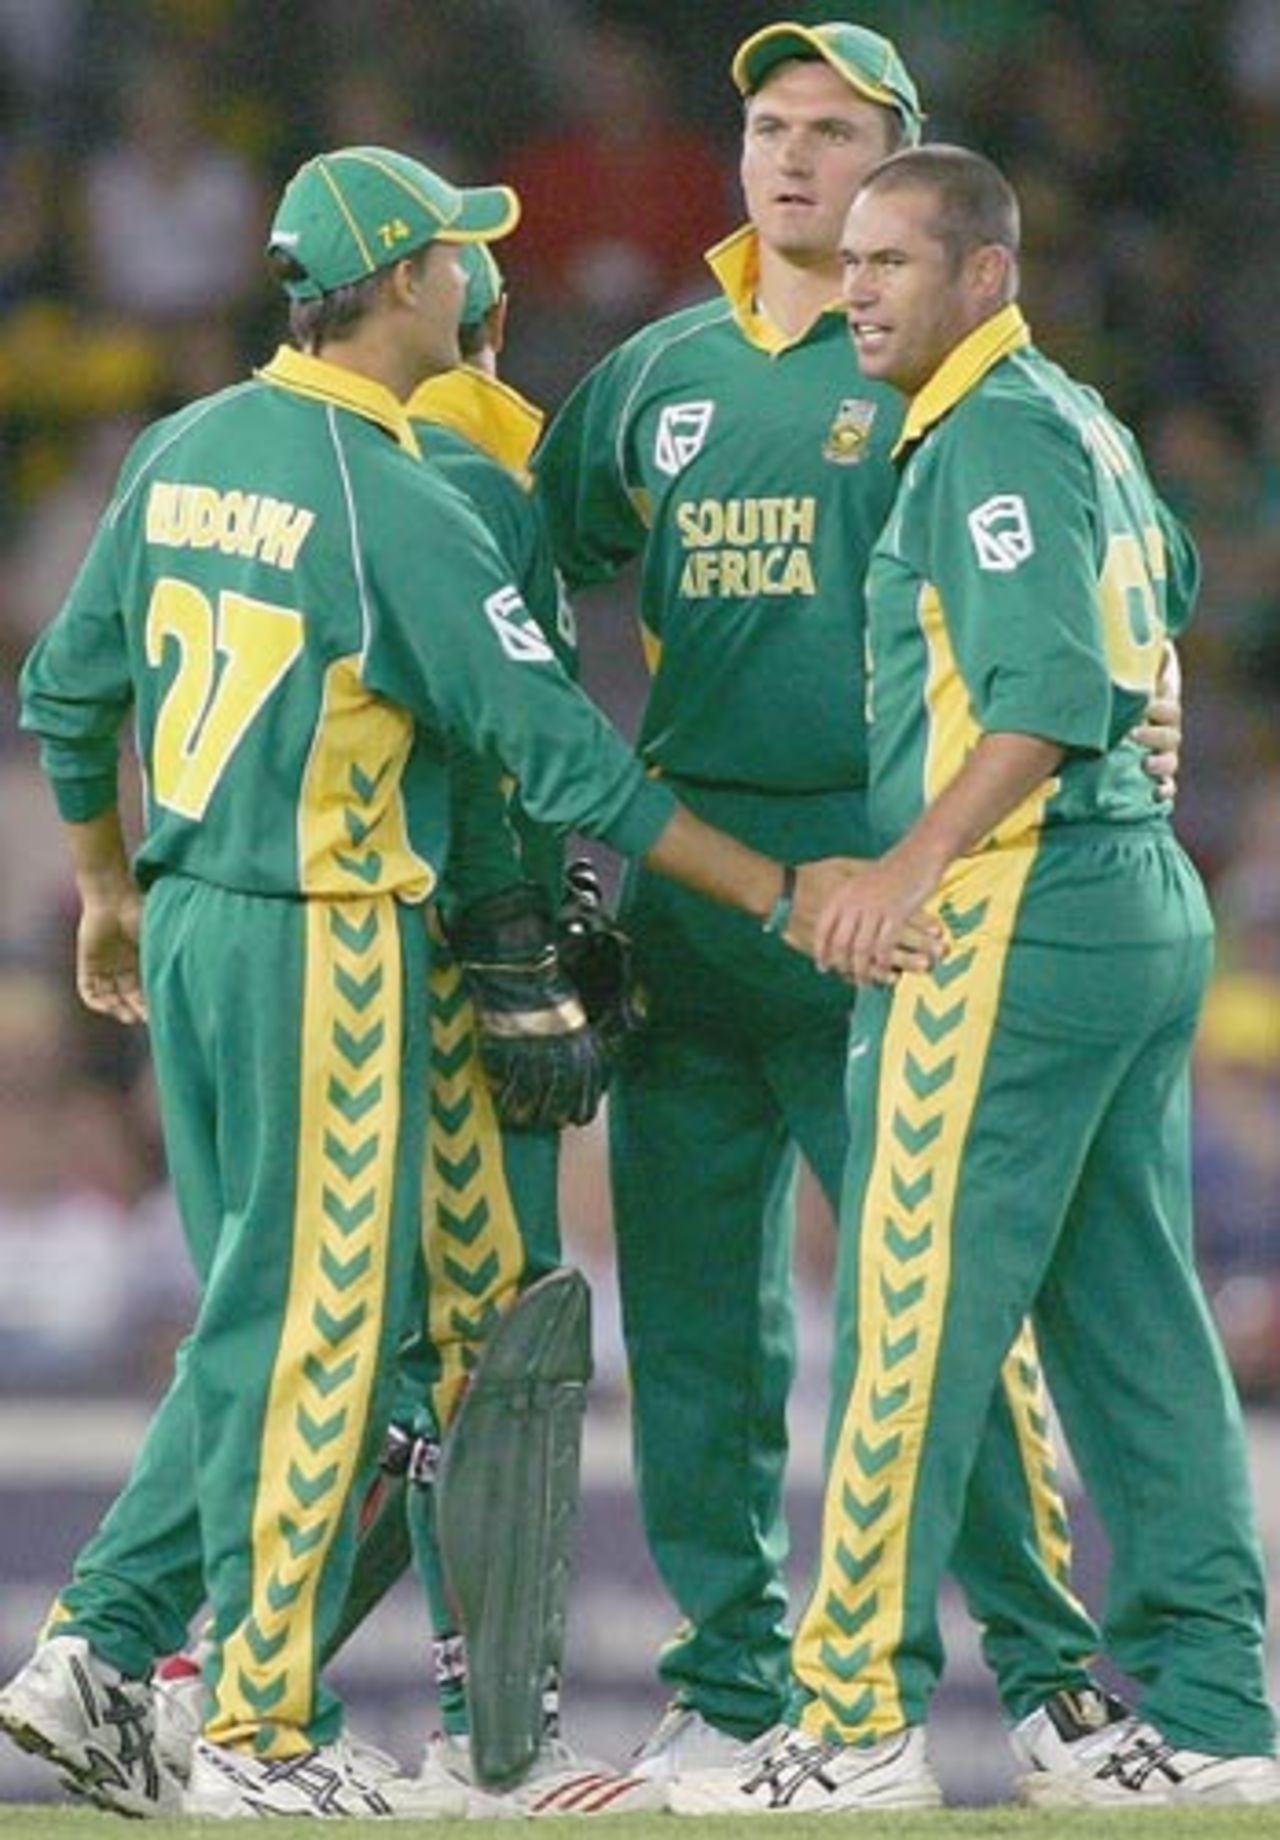 The South Africans celebrate the wicket of Adam Gilchrist, Australia v South Africa, VB Series, Melbourne, February 3, 2006